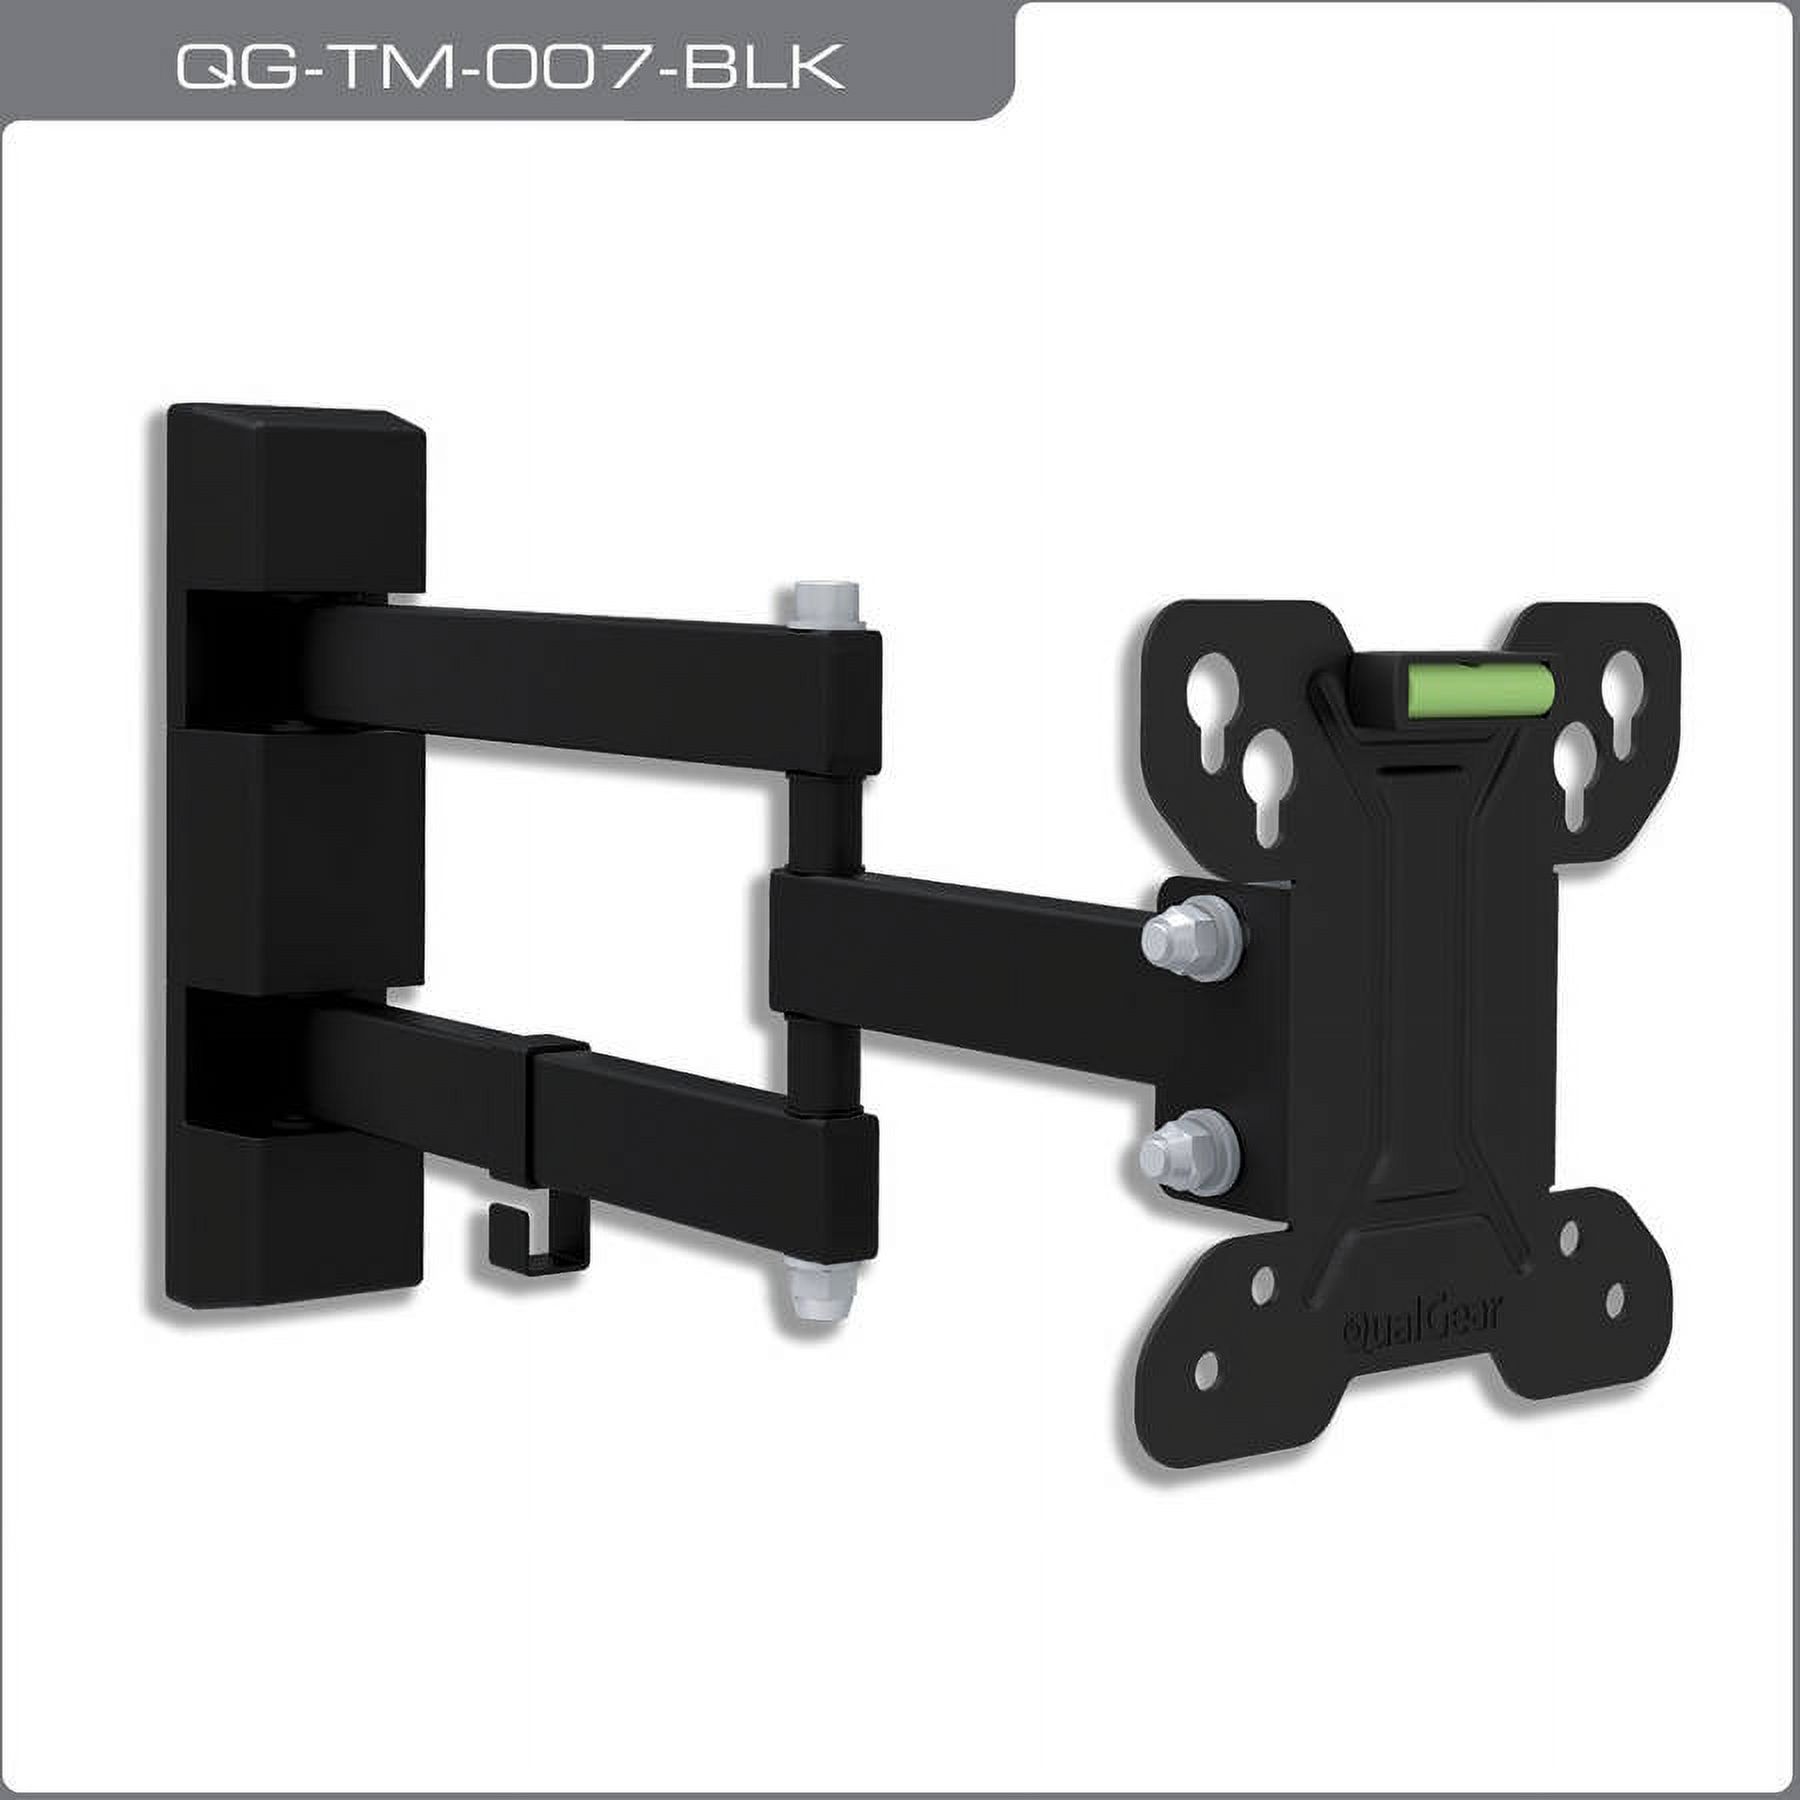 QualGear QG-TM-007-BLK 13-Inch to 27-Inch Universal Low Profile Full Motion TV Wall Mount LED TVs, Black - image 1 of 5